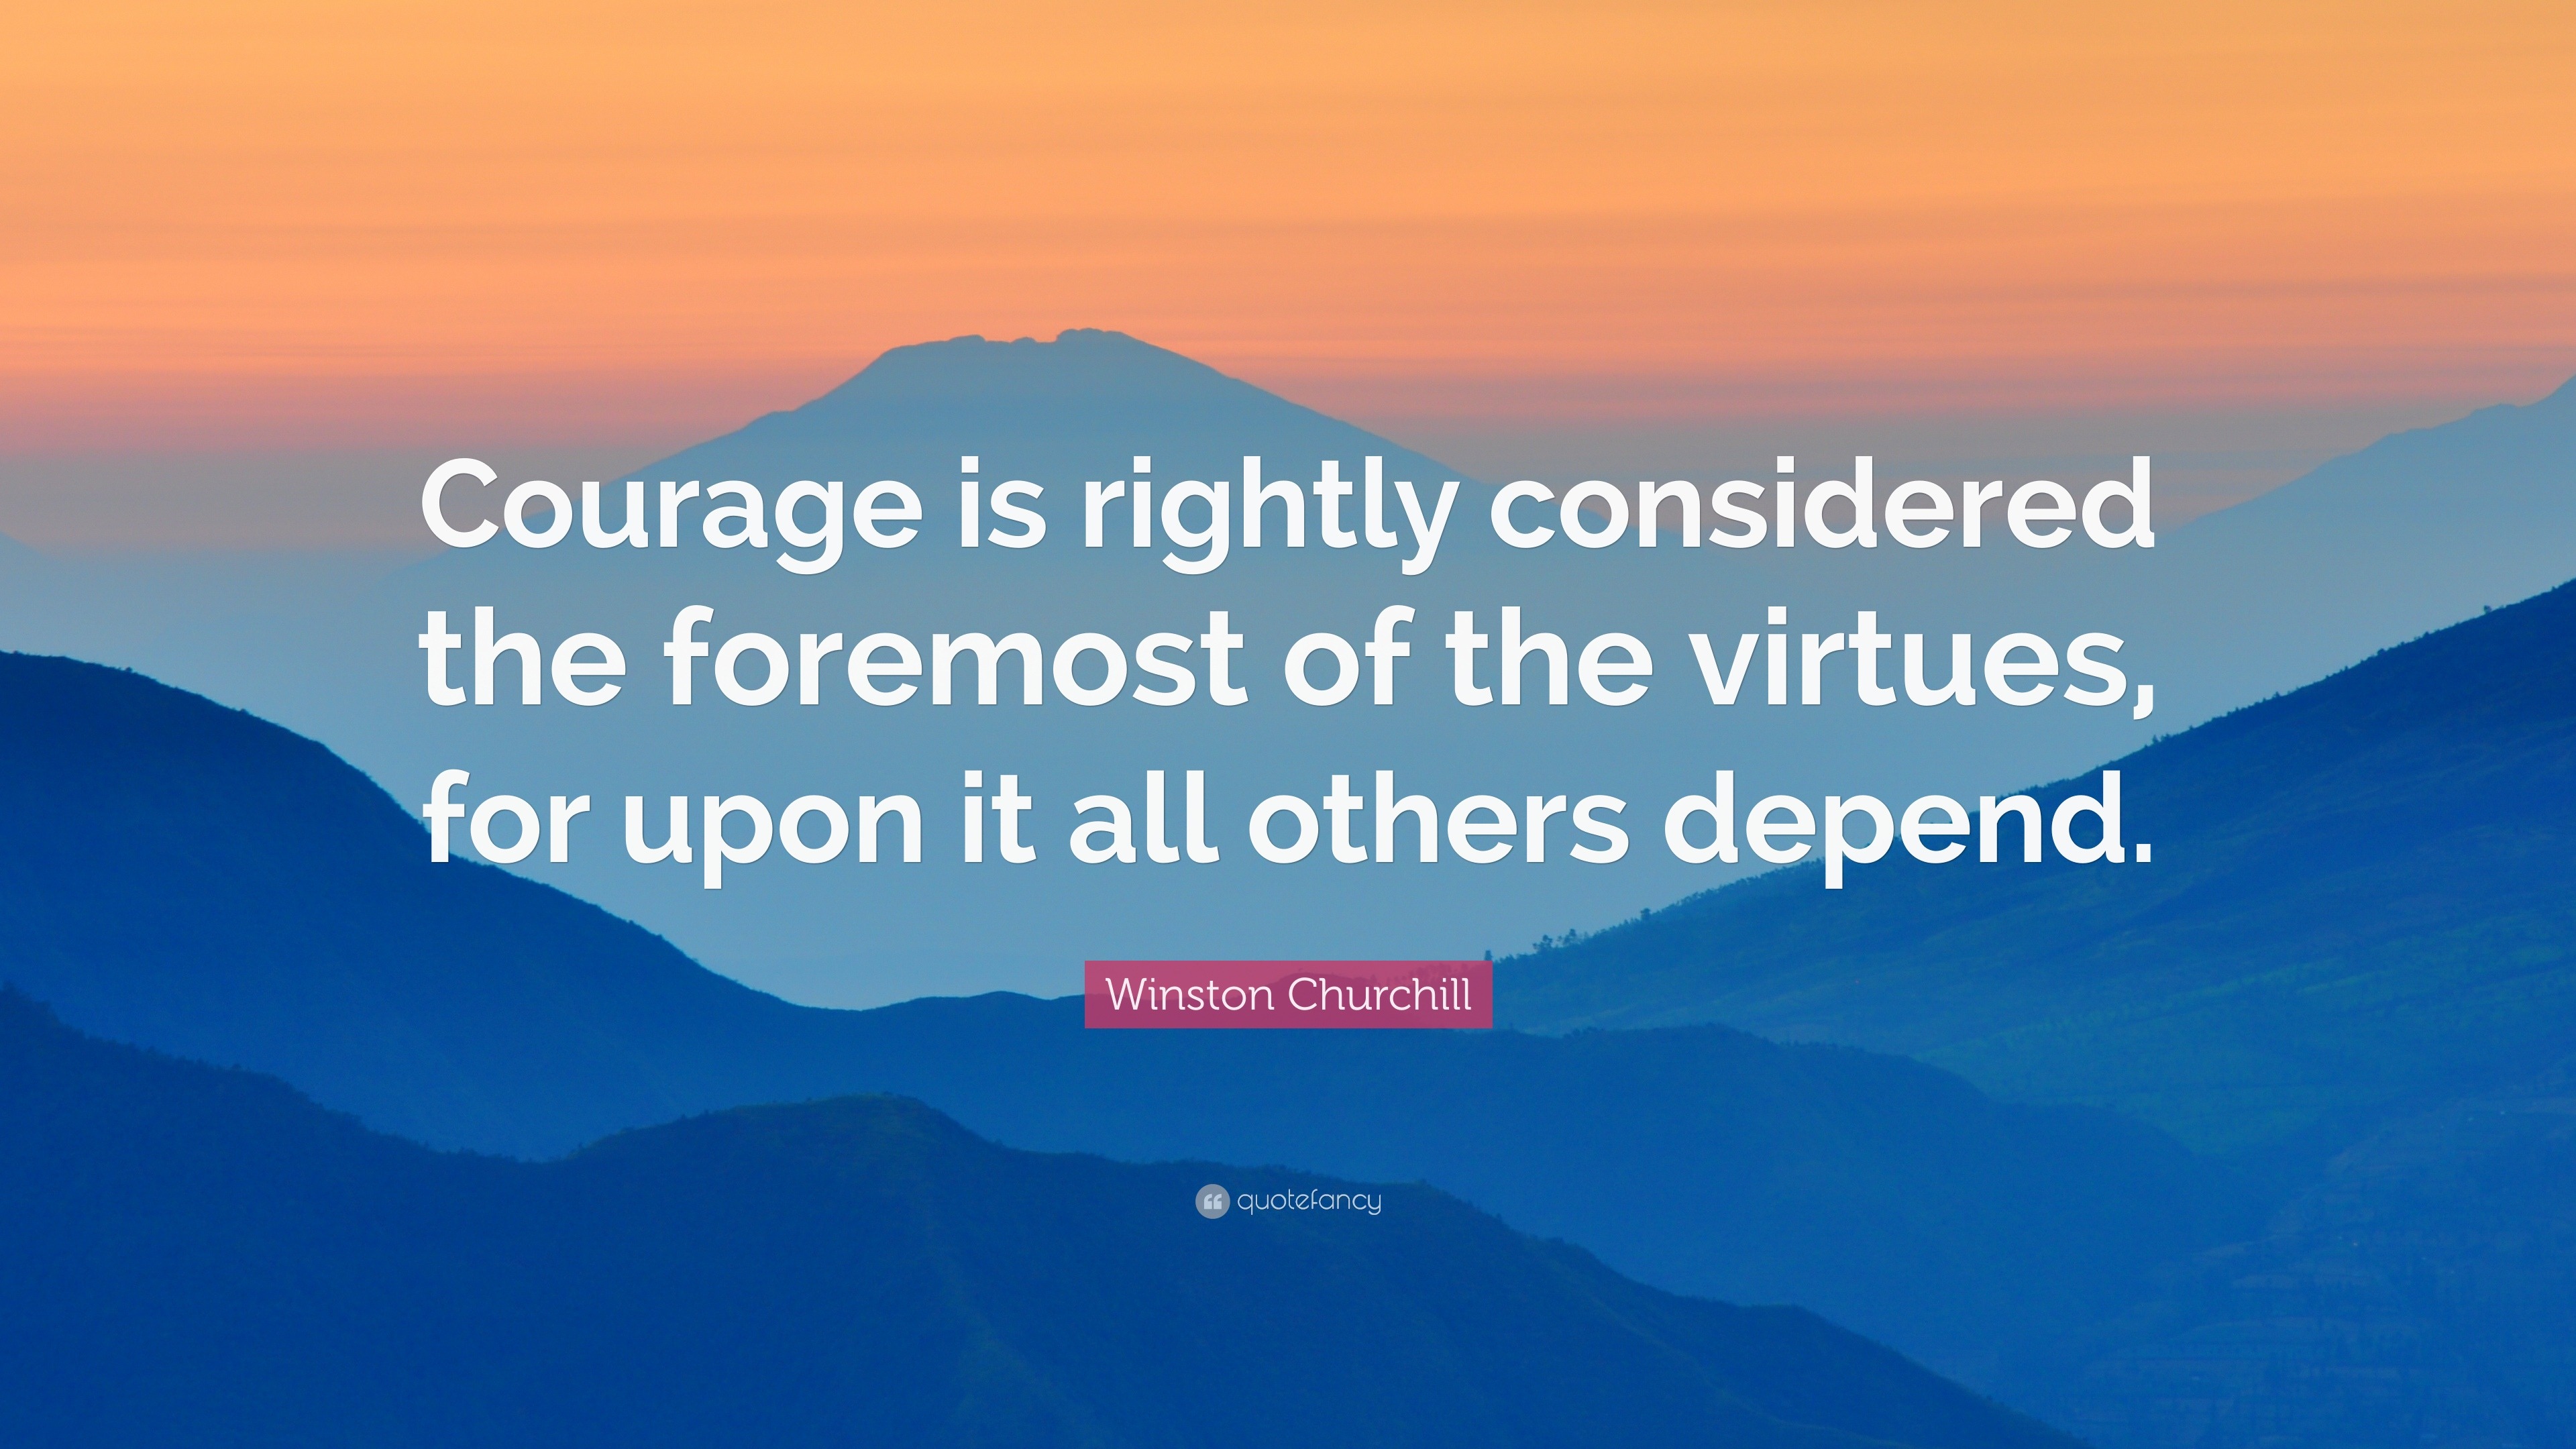 Winston Churchill Quote: “Courage is rightly considered the foremost of ...